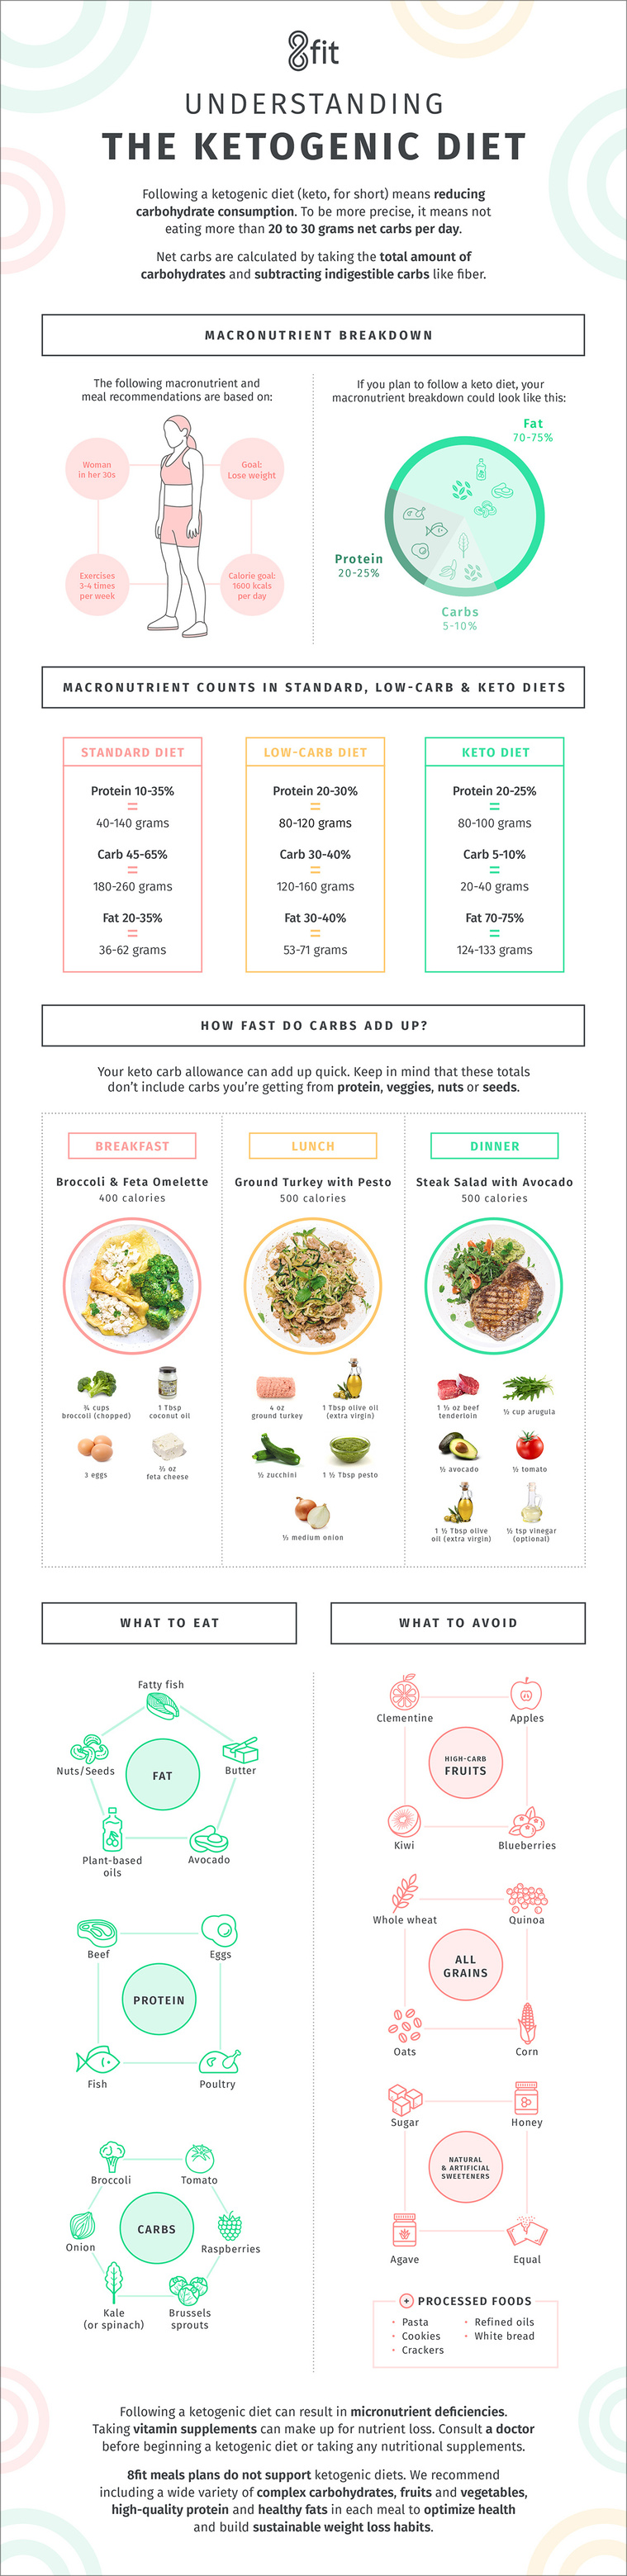 Understanding the ketogenic diet - Infographic - Fitness -Nutrition